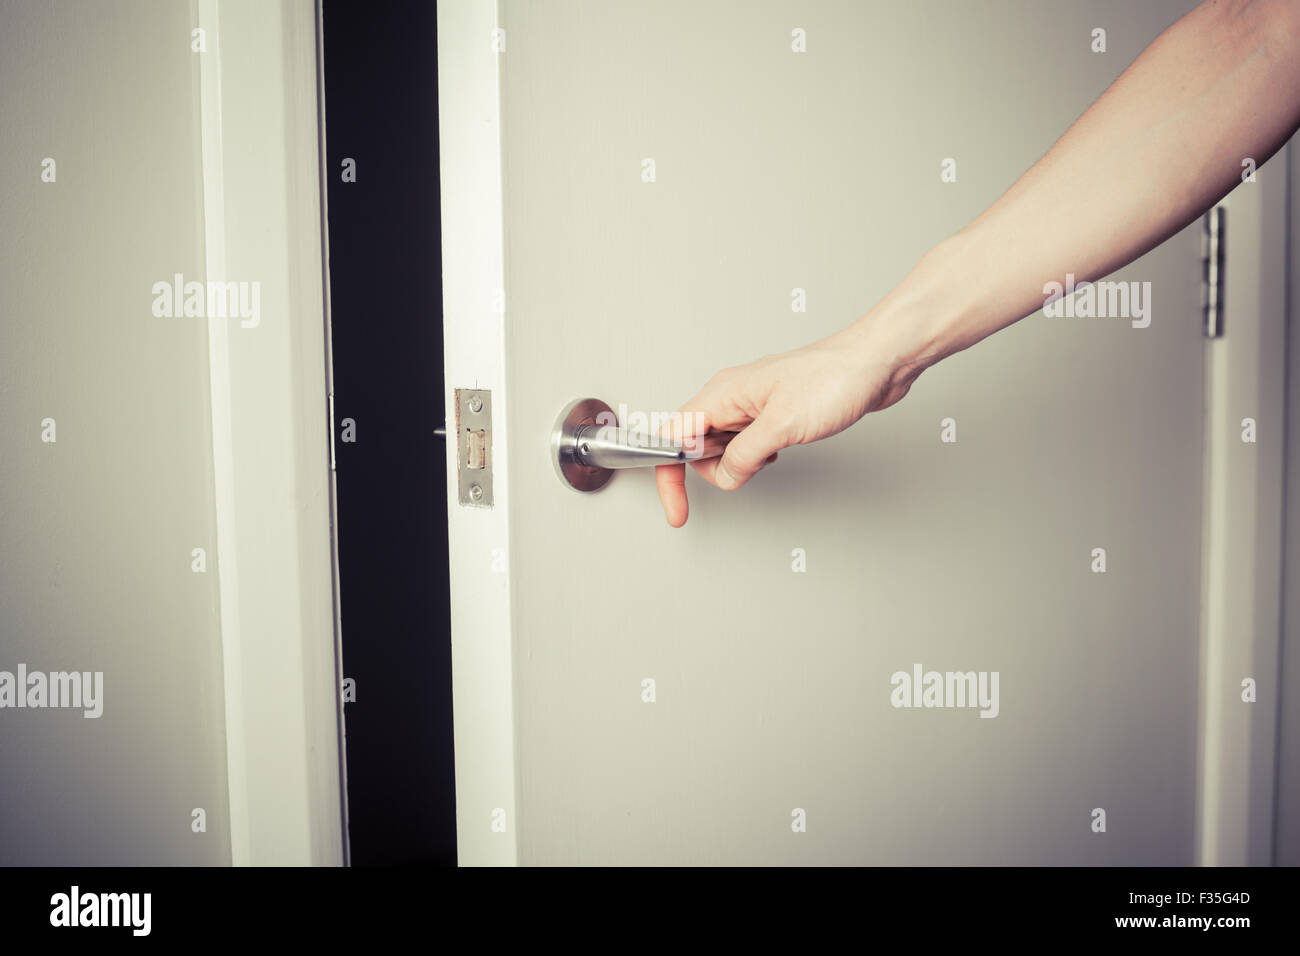 Closeup on the hand of a woman as she is opening a door at night Stock Photo